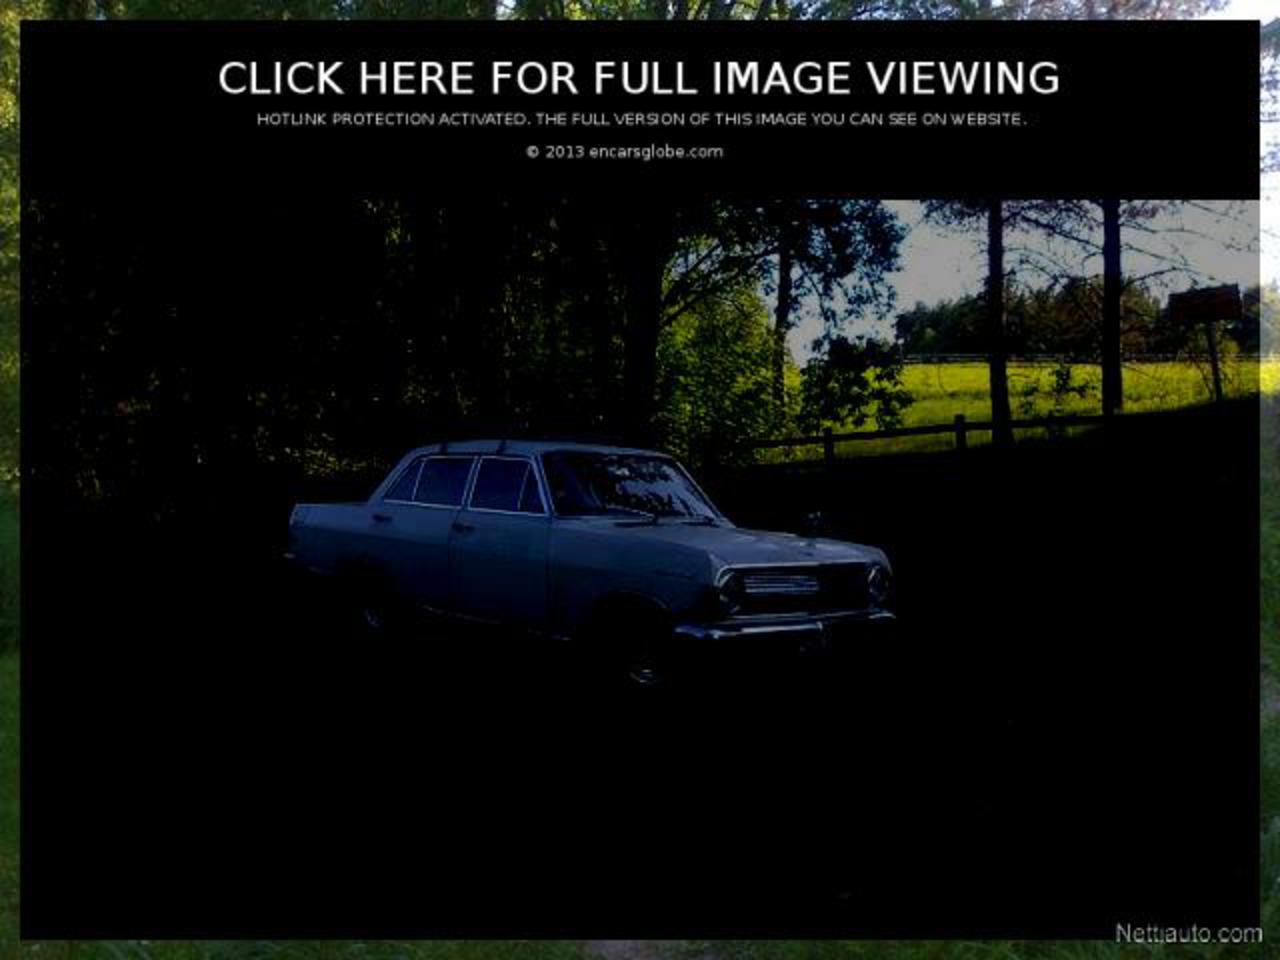 Opel Rekord 1700 2dr Photo Gallery: Photo #08 out of 12, Image ...